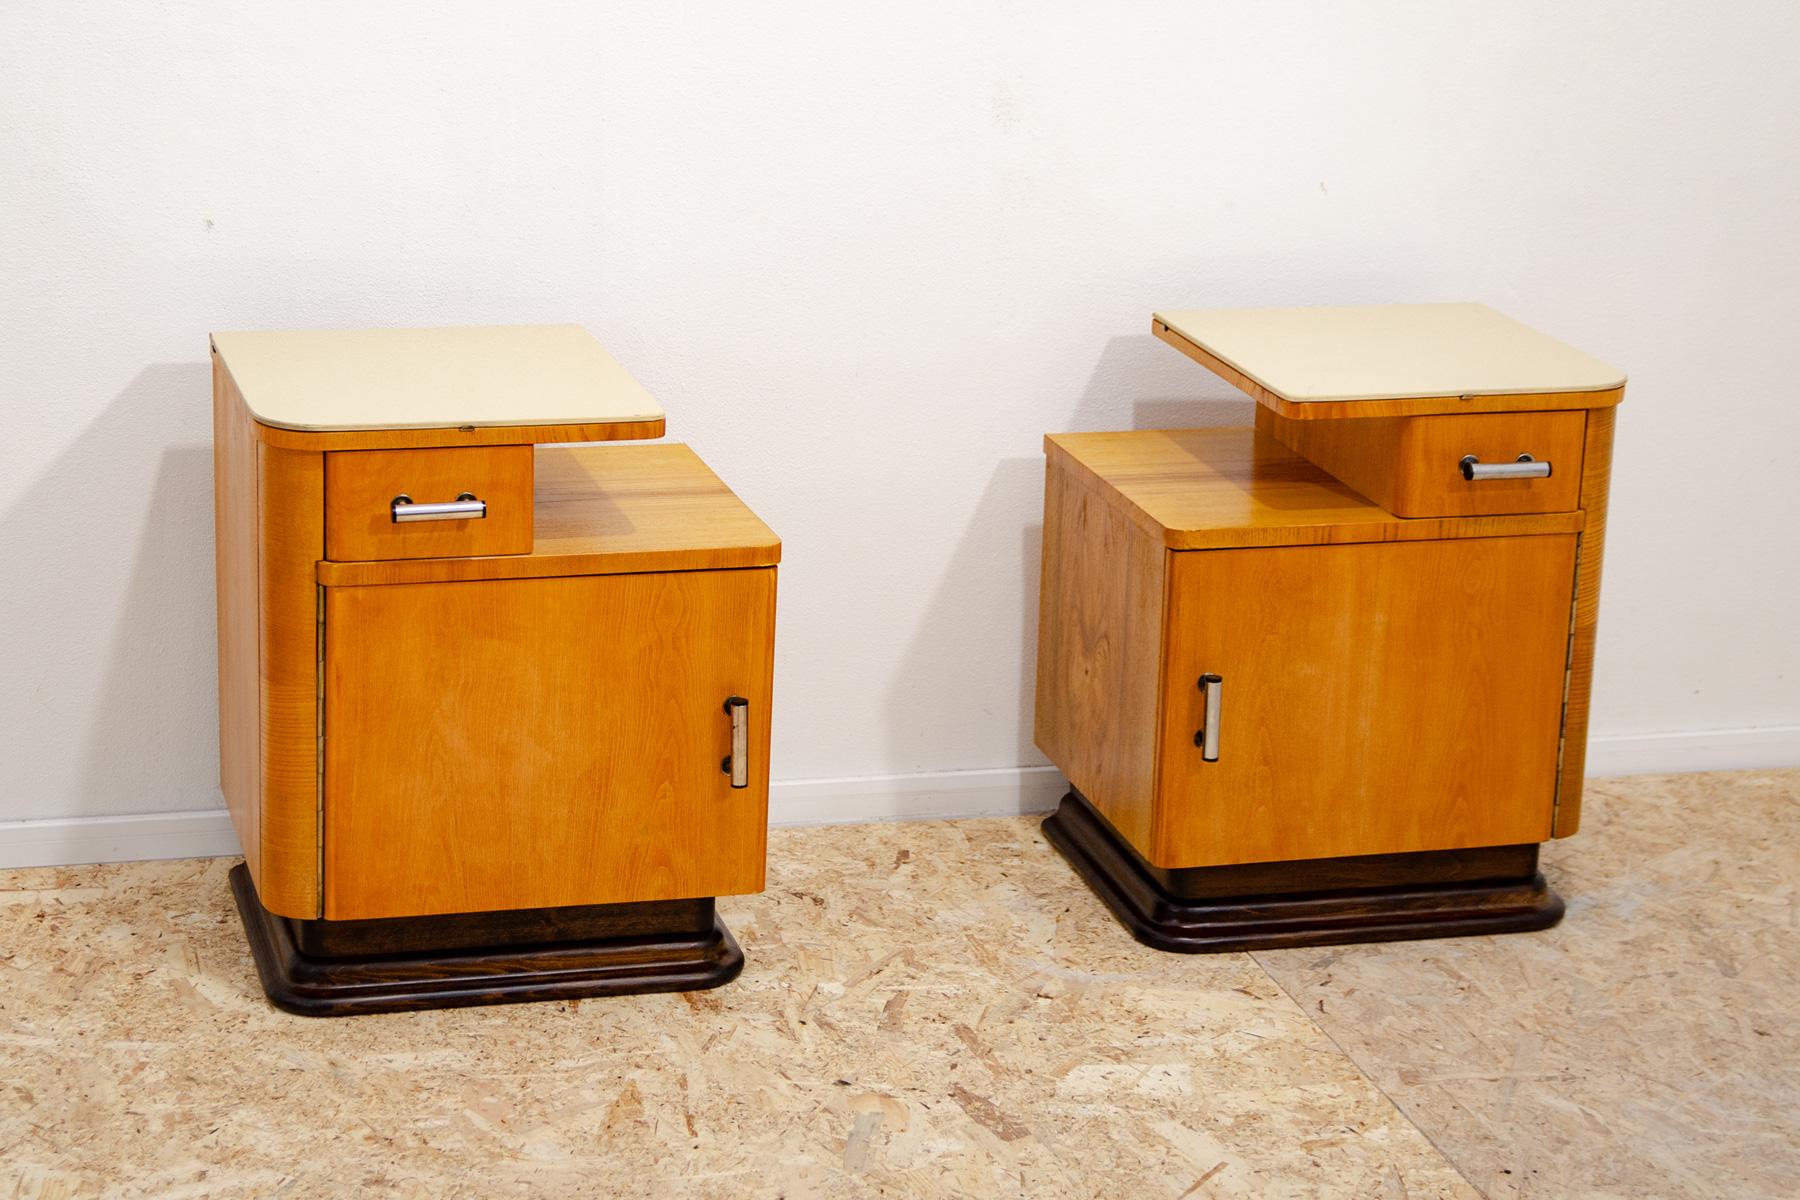 These bedside tables were designed by Jindřich Halabala and made in the 1930s. They are made of beech wood, have chrome handles, and a glass top. There is a solid walnut base on the bottom of the tables. They are in excellent condition, after